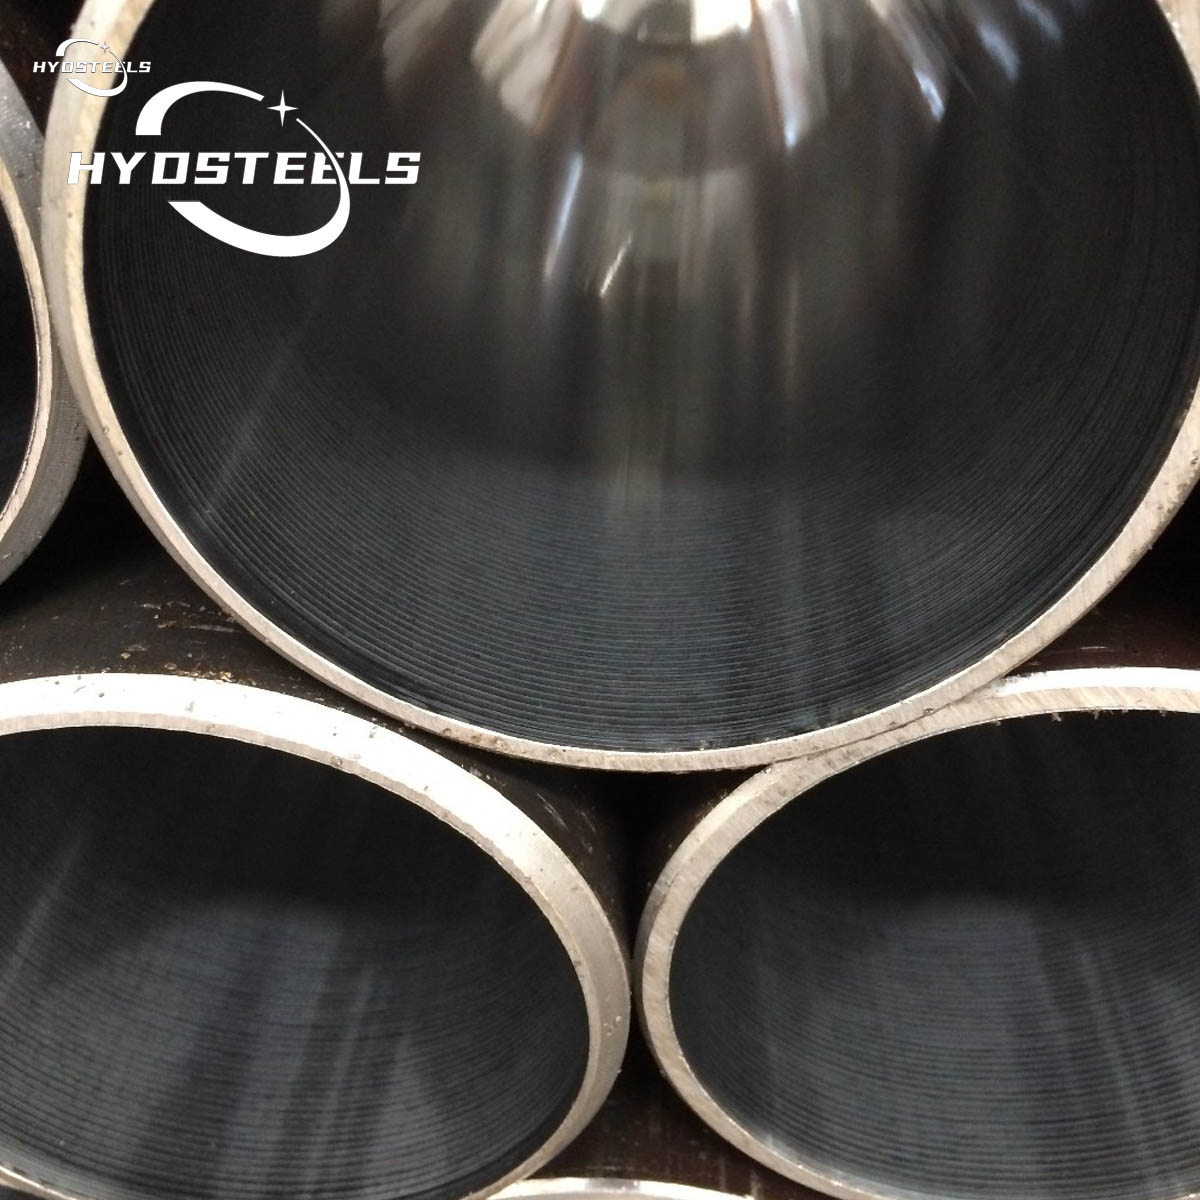 Honing Seamless Pipe Seamless Steel TubeS Manufacturers Supplier Company in China